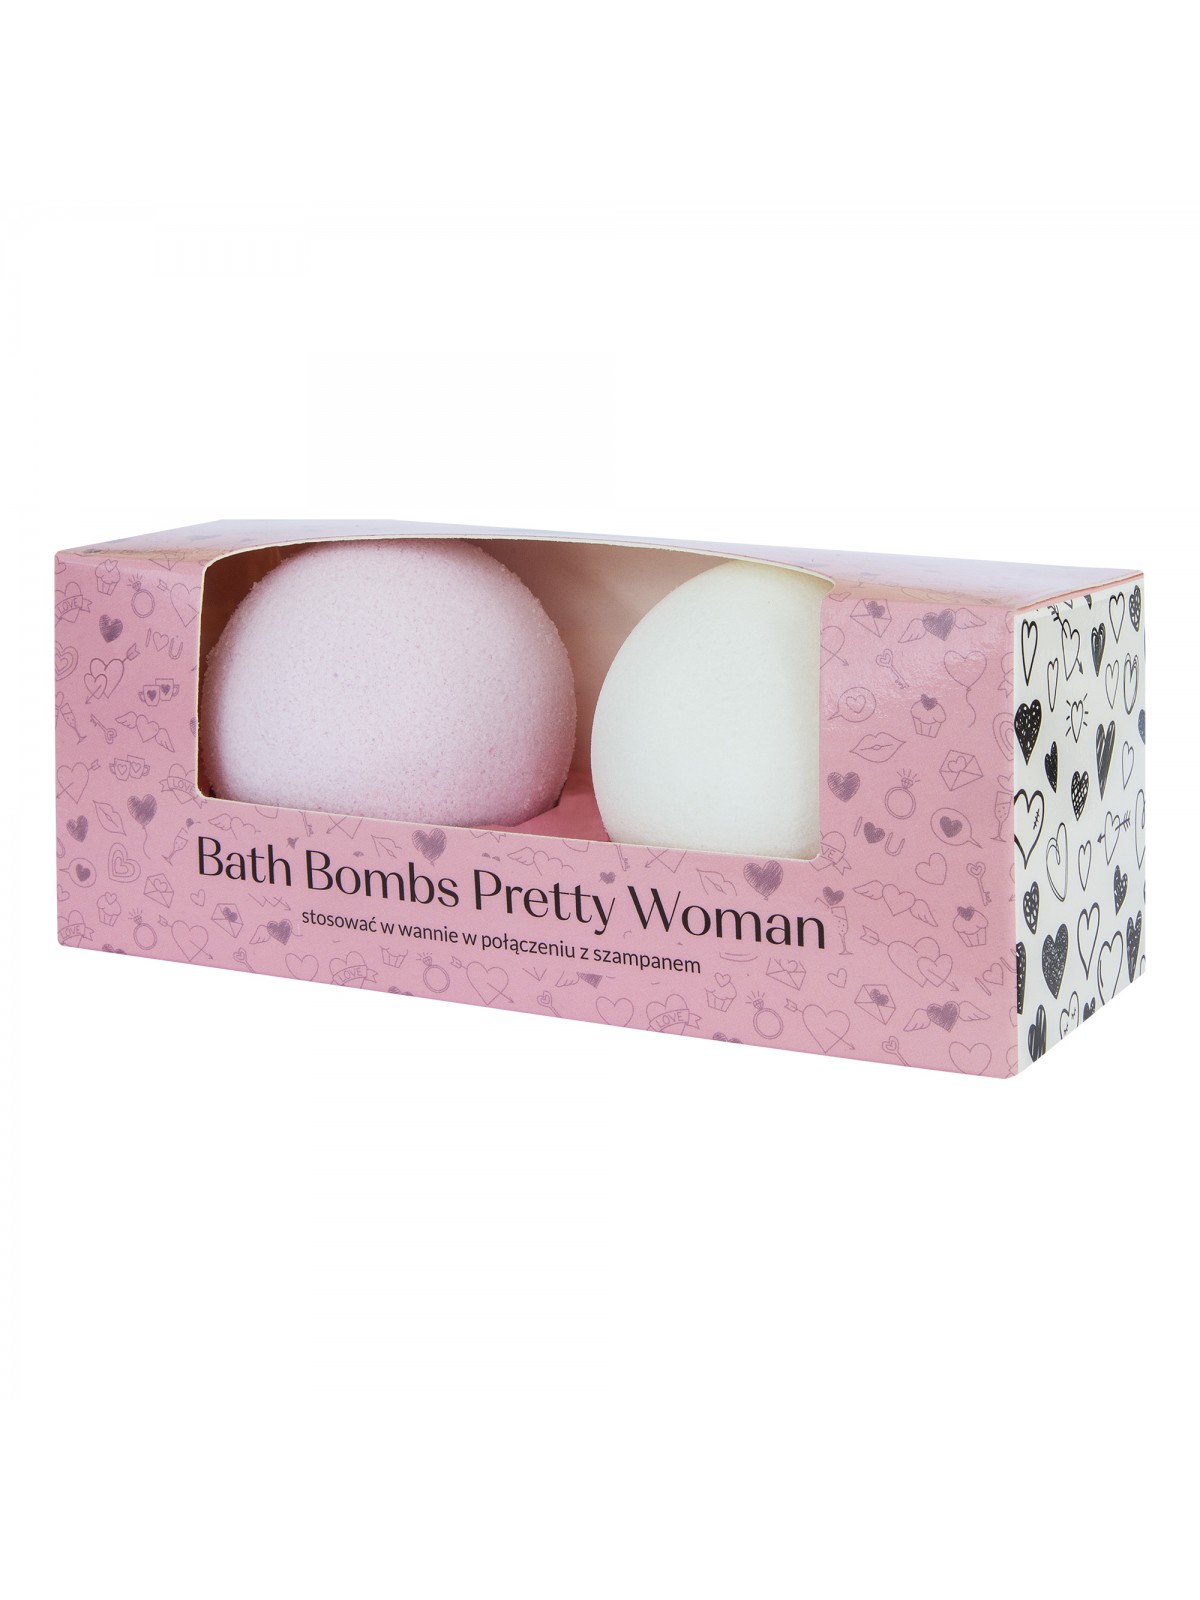 Bath Bombs Pretty Woman FORGET-ME-NOT & MAGNOLIA